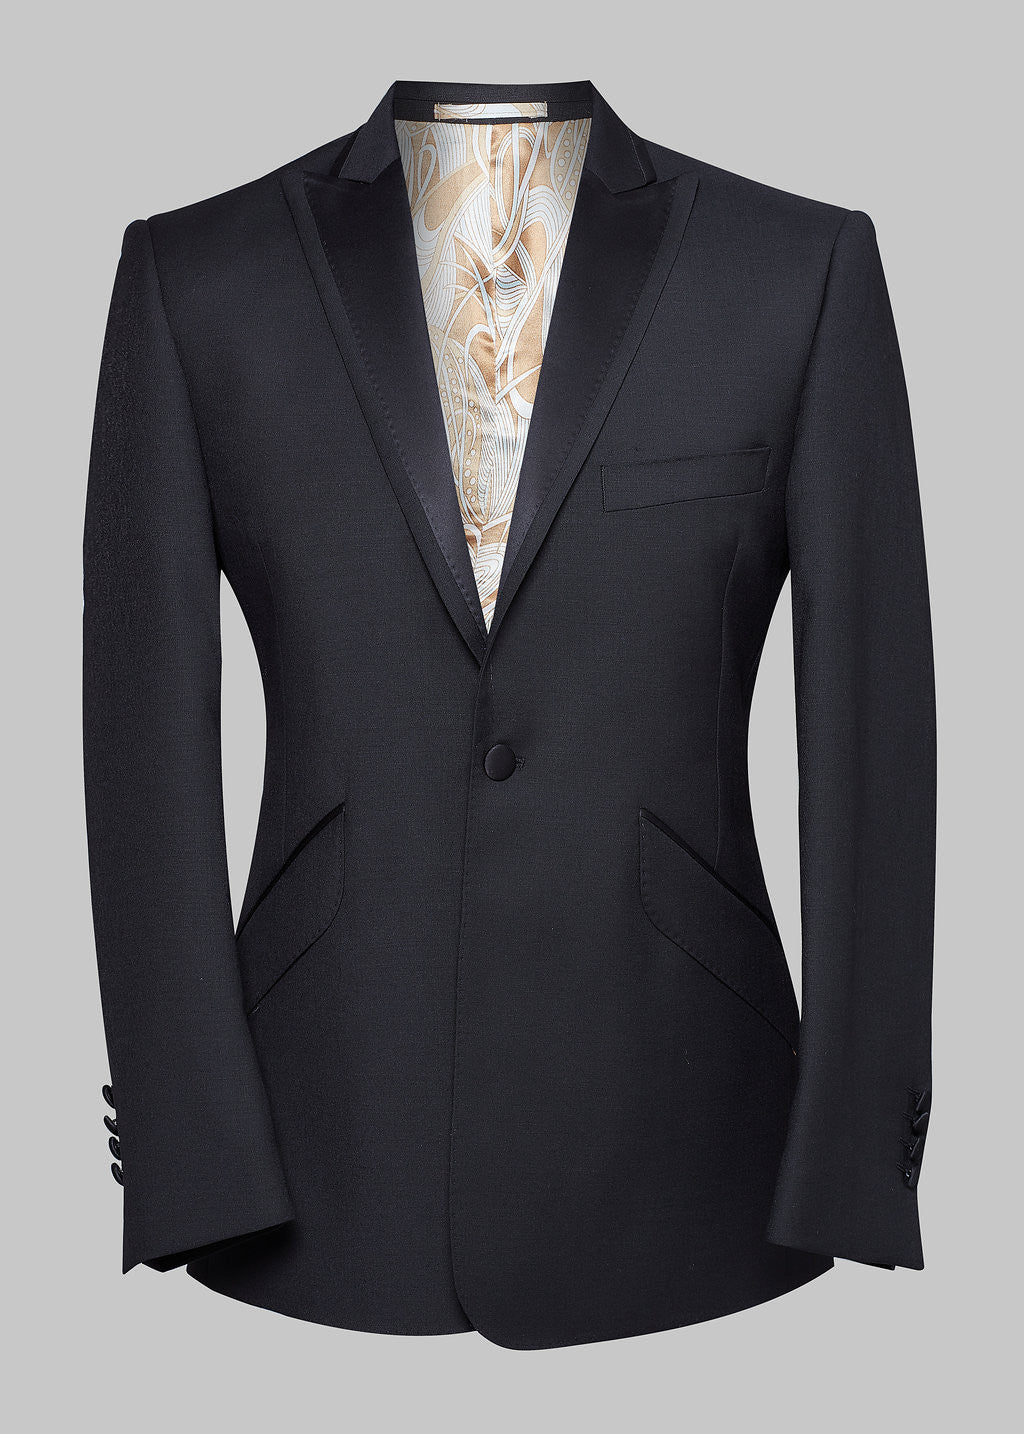 The Biscay Classic Black Dinner Suit